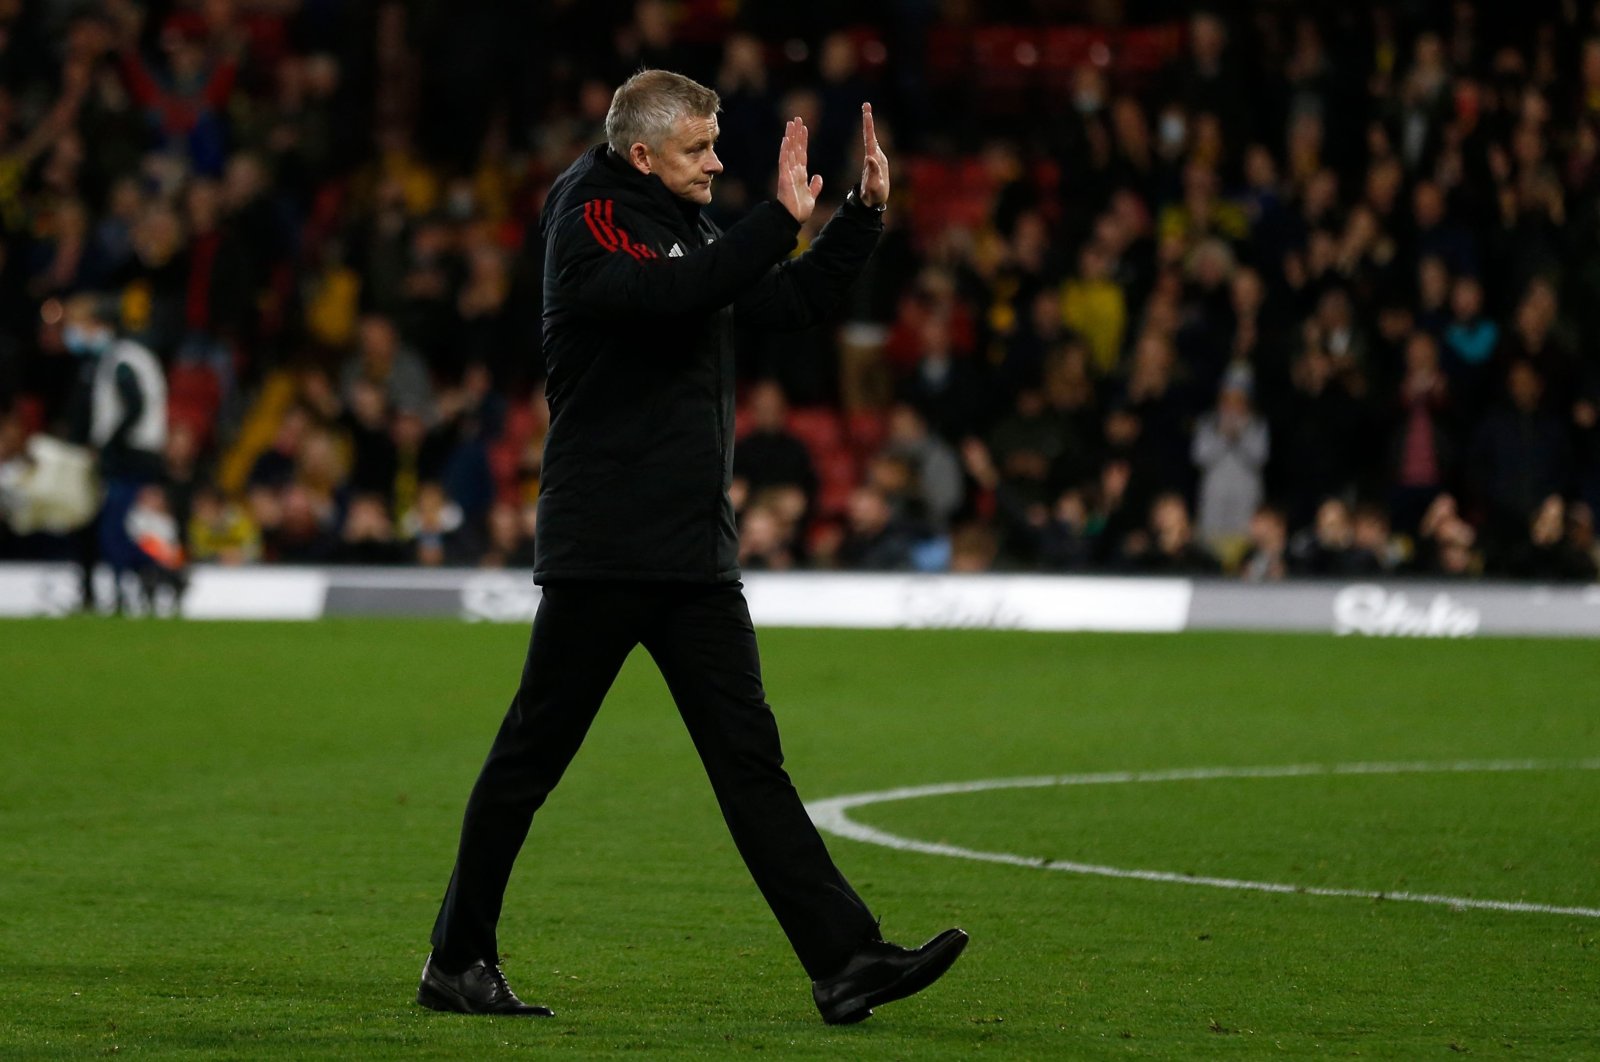 Ole Gunnar Solskjaer reacts at the final whistle during the match between Manchester United and Watford, in Watford, England, Nov. 20, 2021. (AFP PHOTO) 